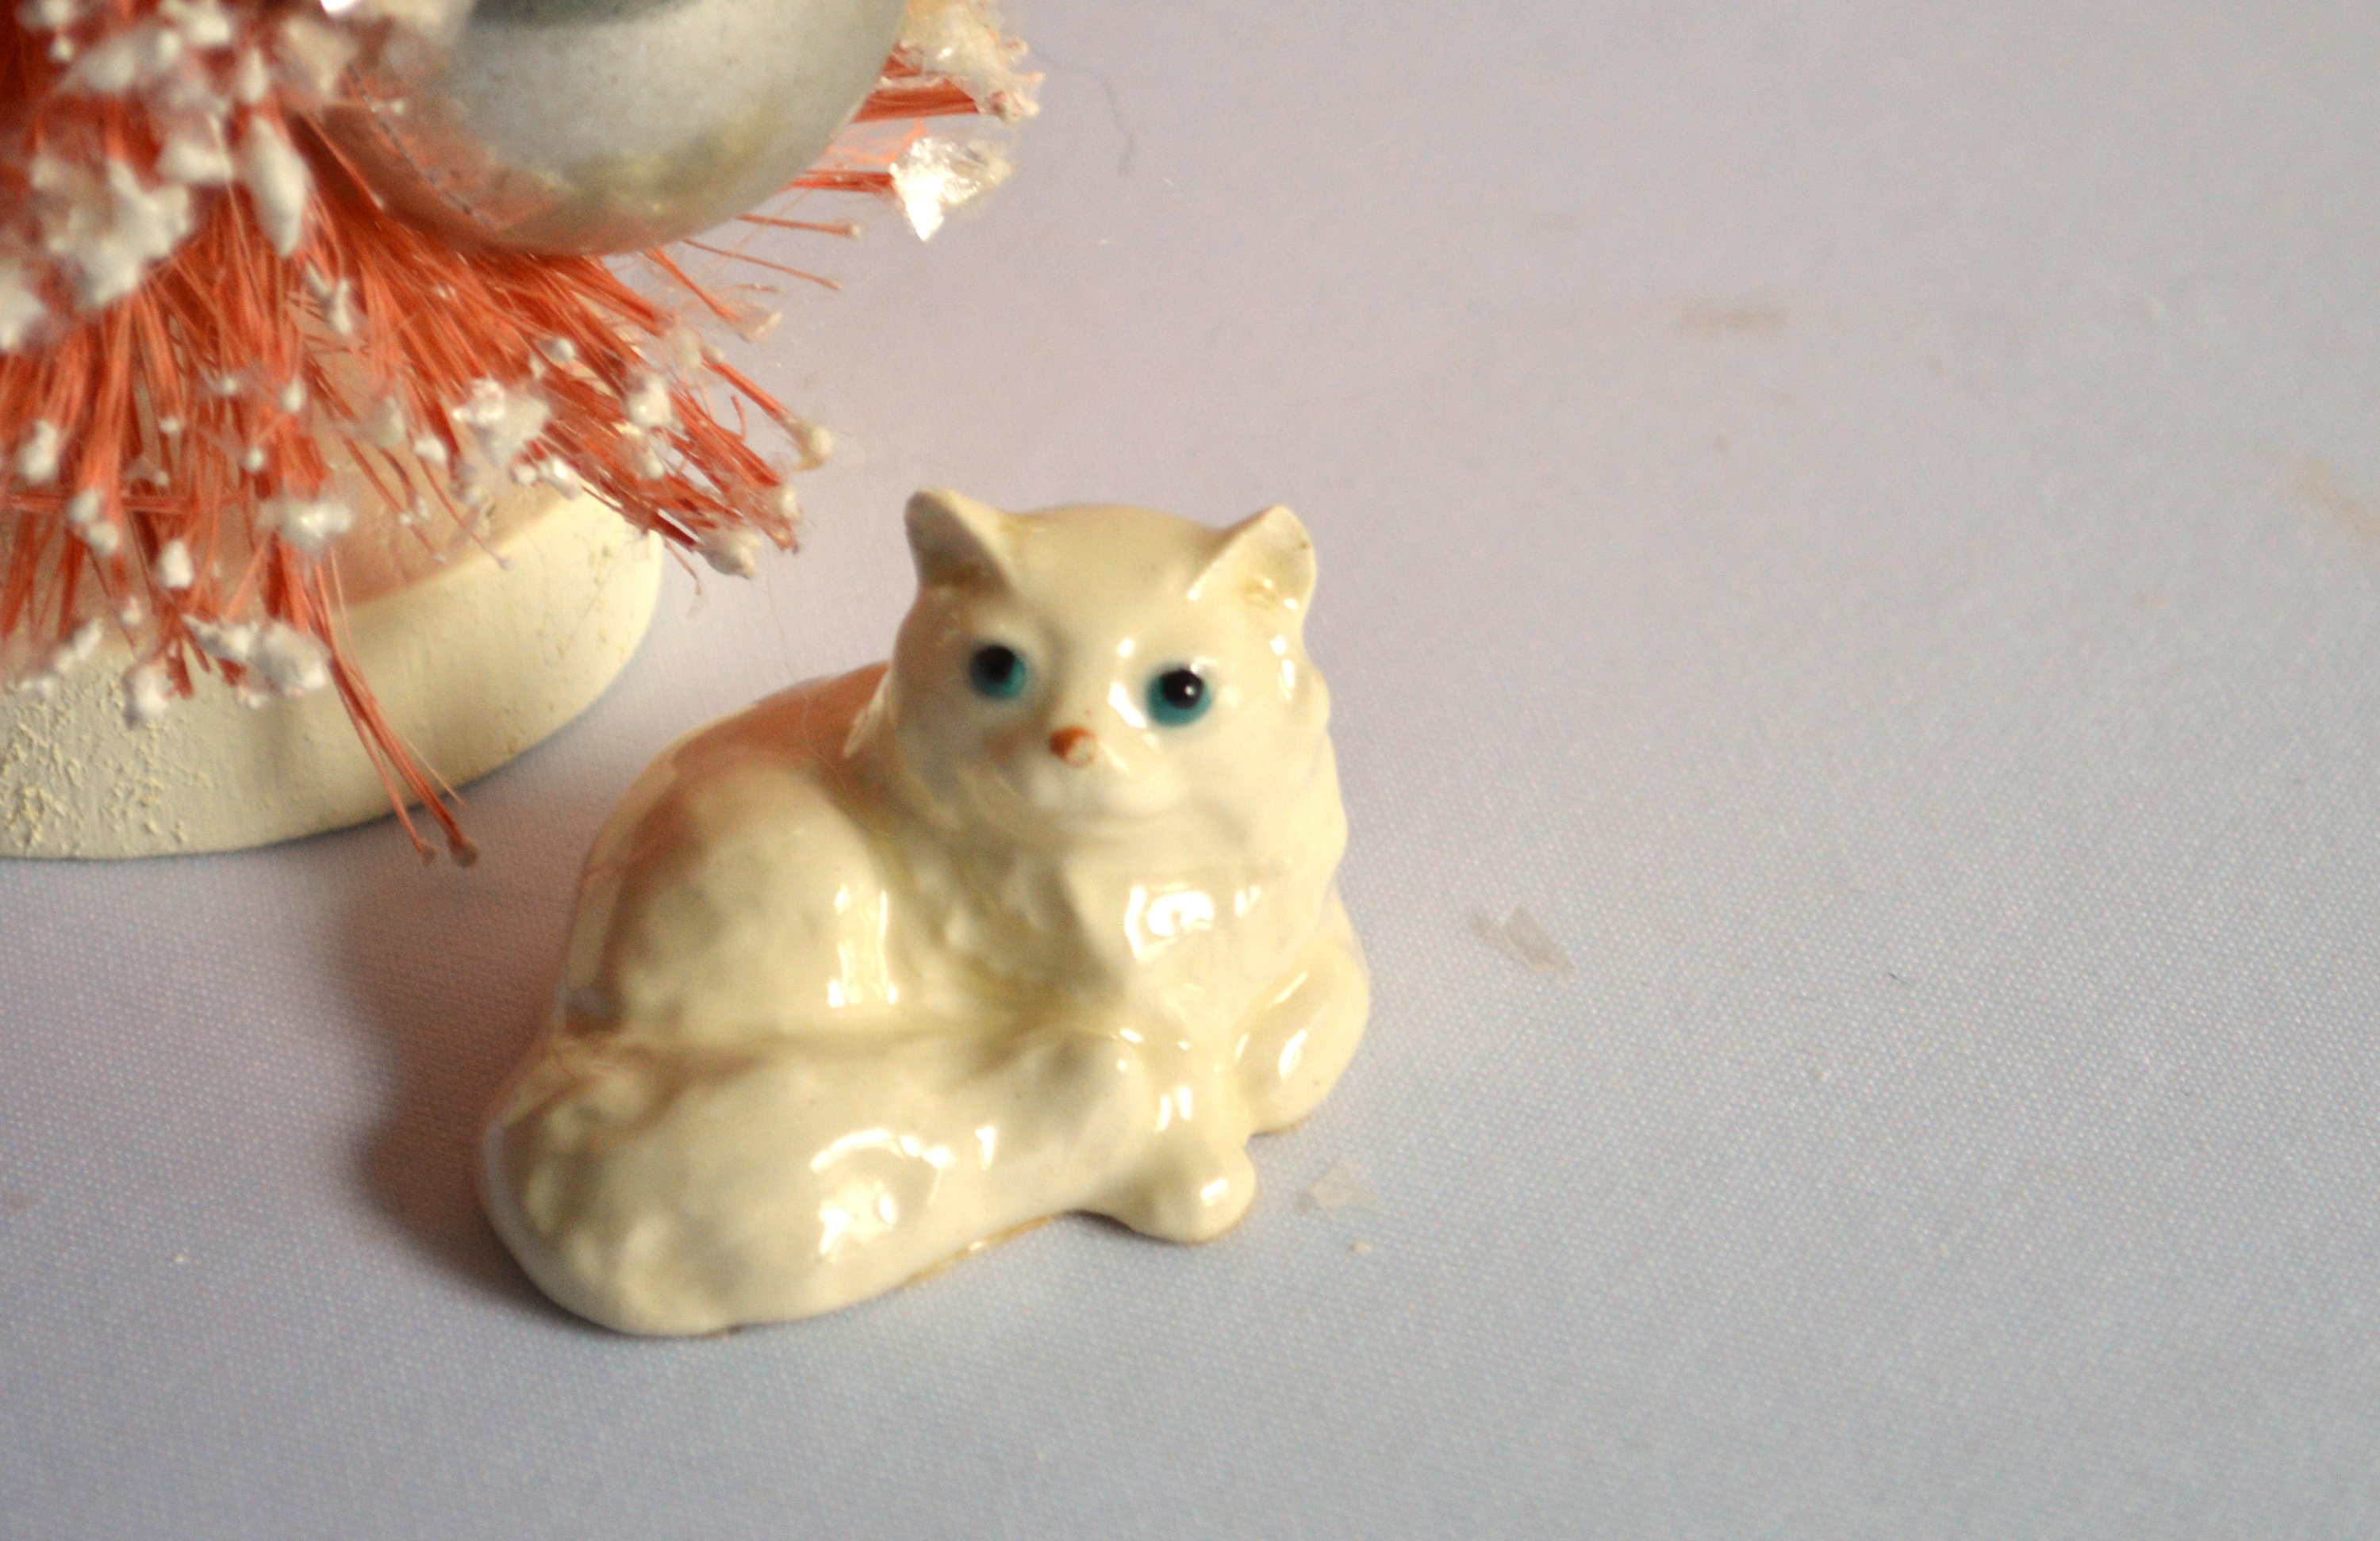 Cozinest White Tabby Bengal Ceramic Cat Figurine Dollhouse Miniatures Collectible Porcelain Kitty Doll Animals Decor or Gift 